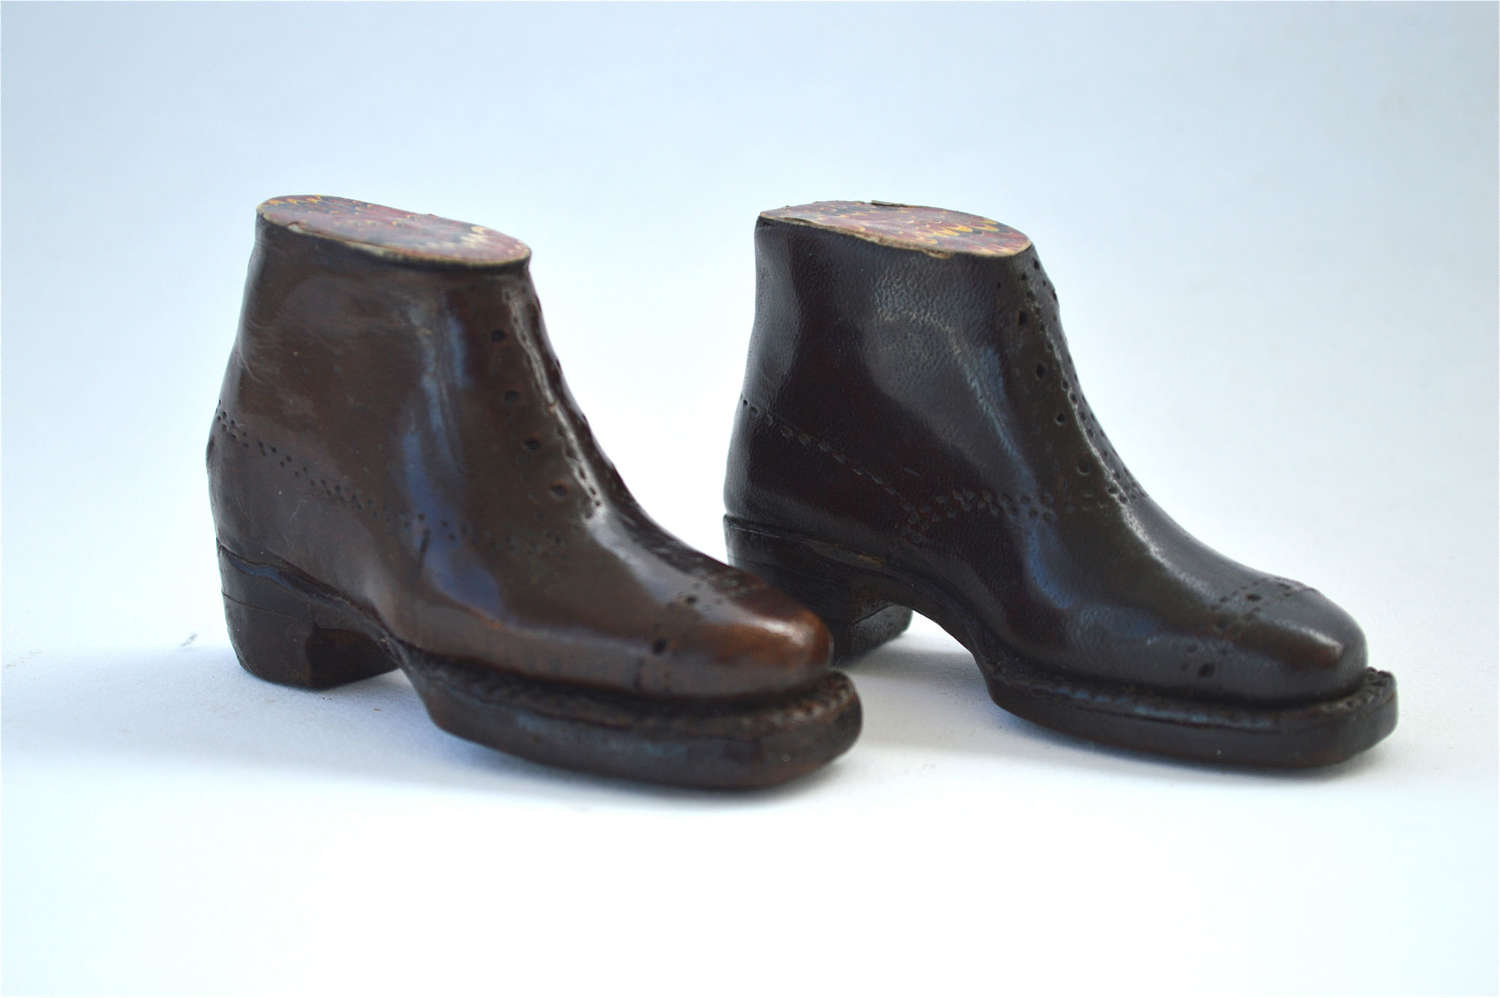 Pair of hand made antique boots.